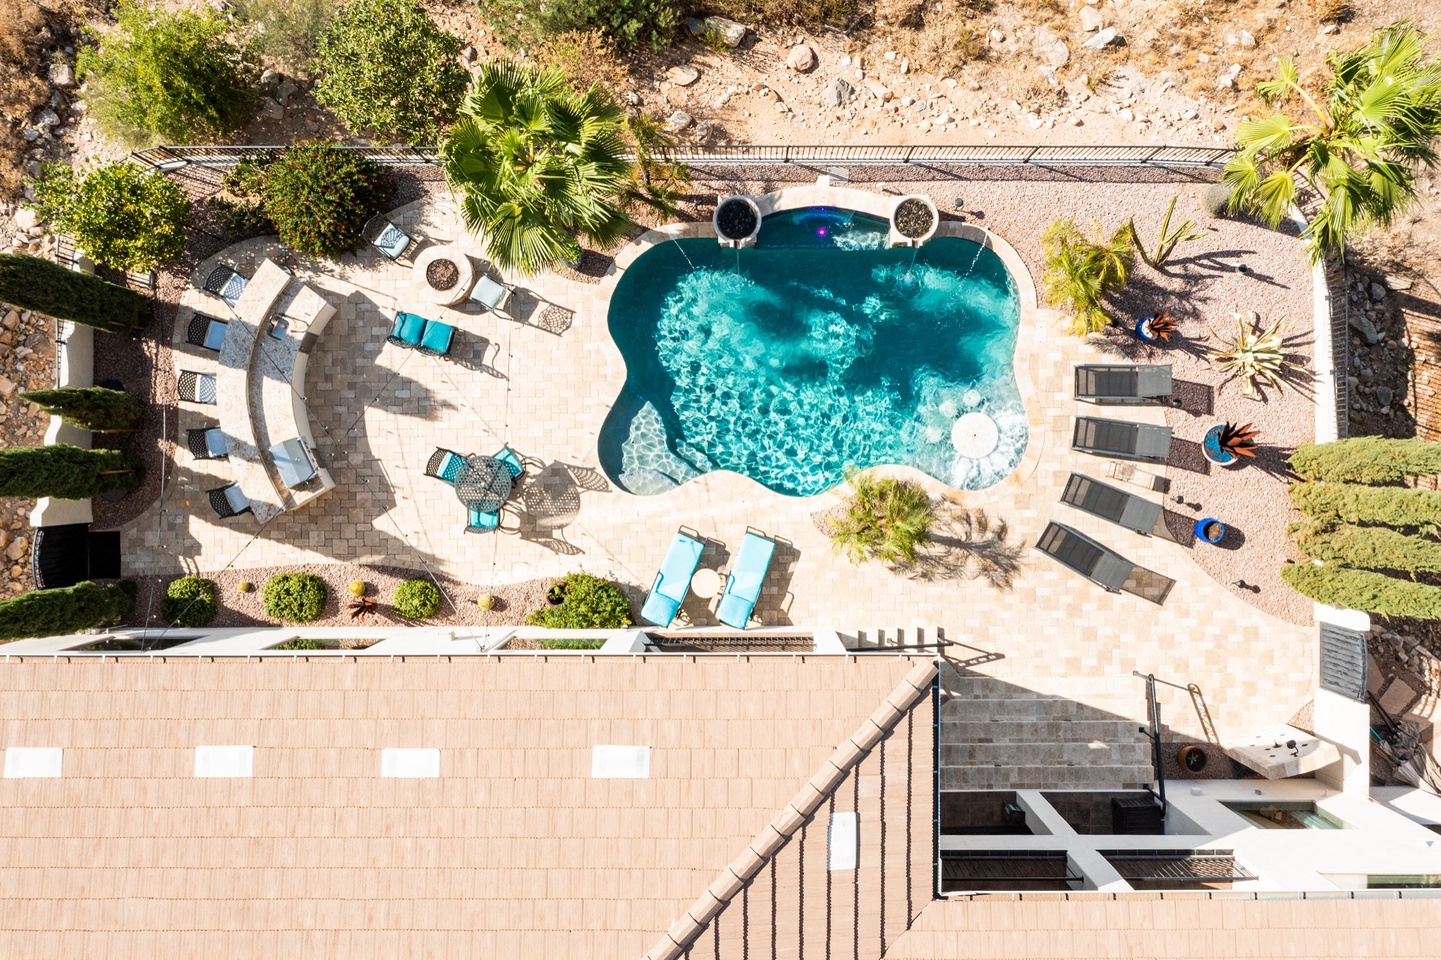 Aerial shot of the well-designed backyard